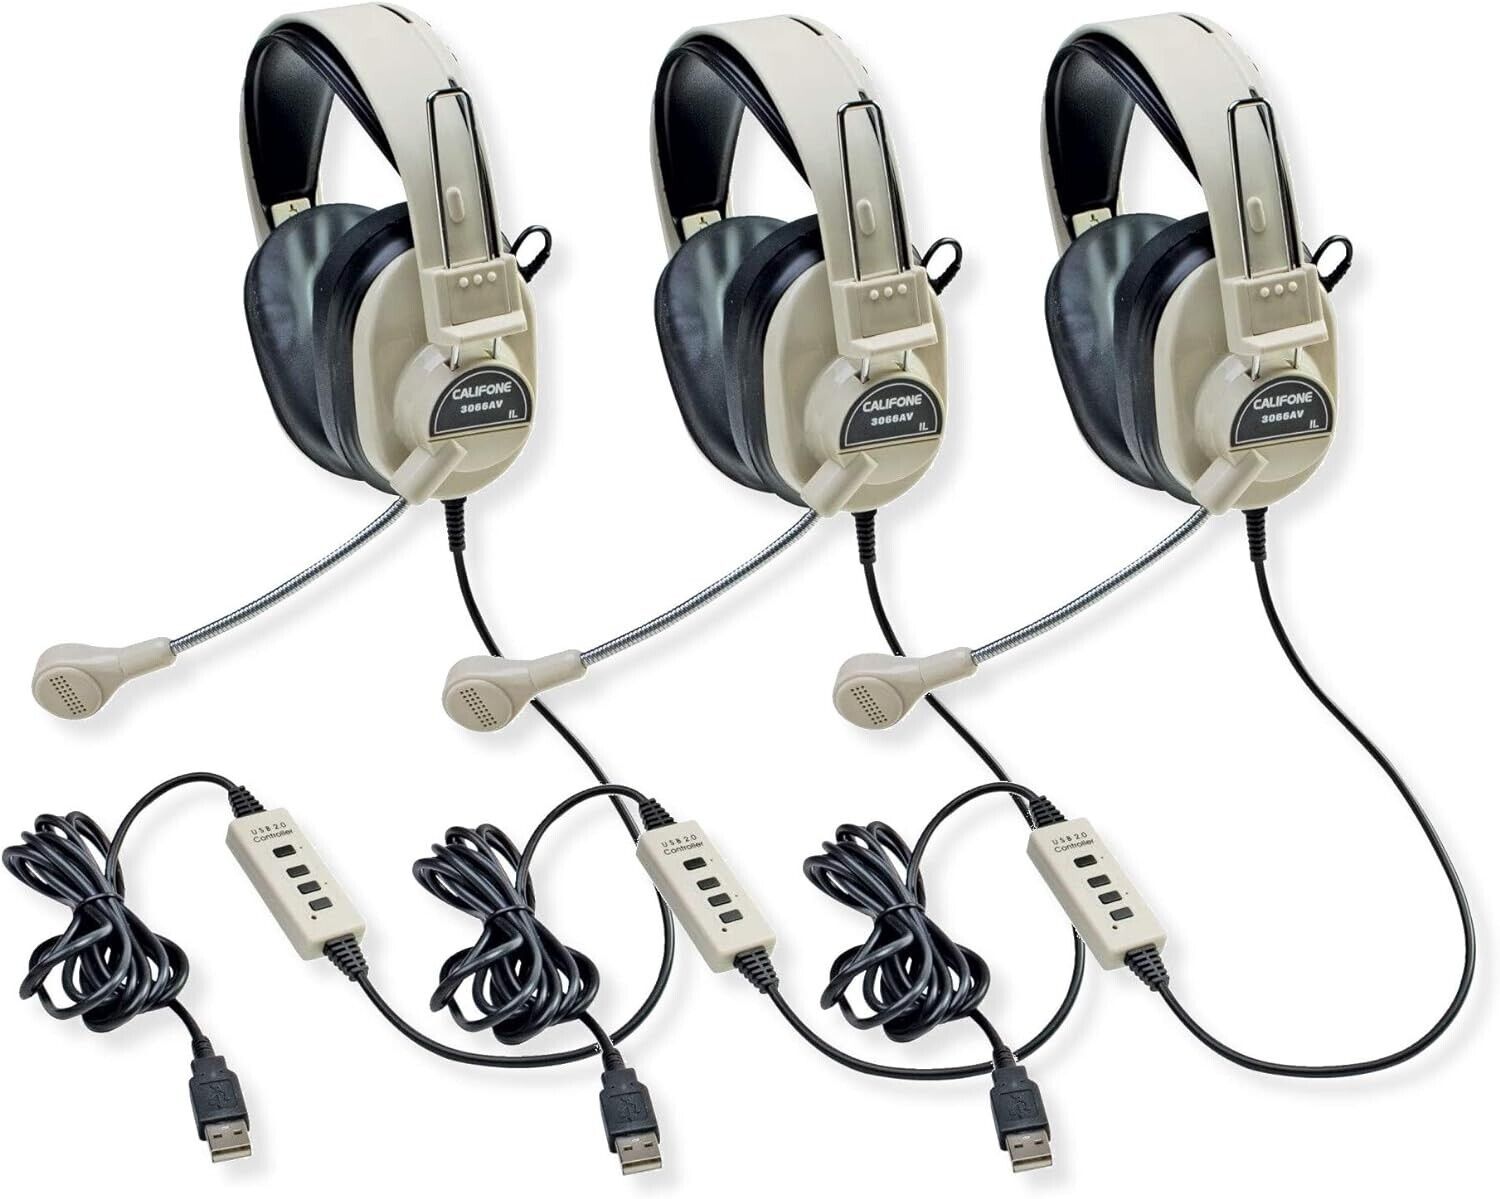 Califone 3066-USB Deluxe Multimedia Stereo Headset with USB Plug (Pack of 3)